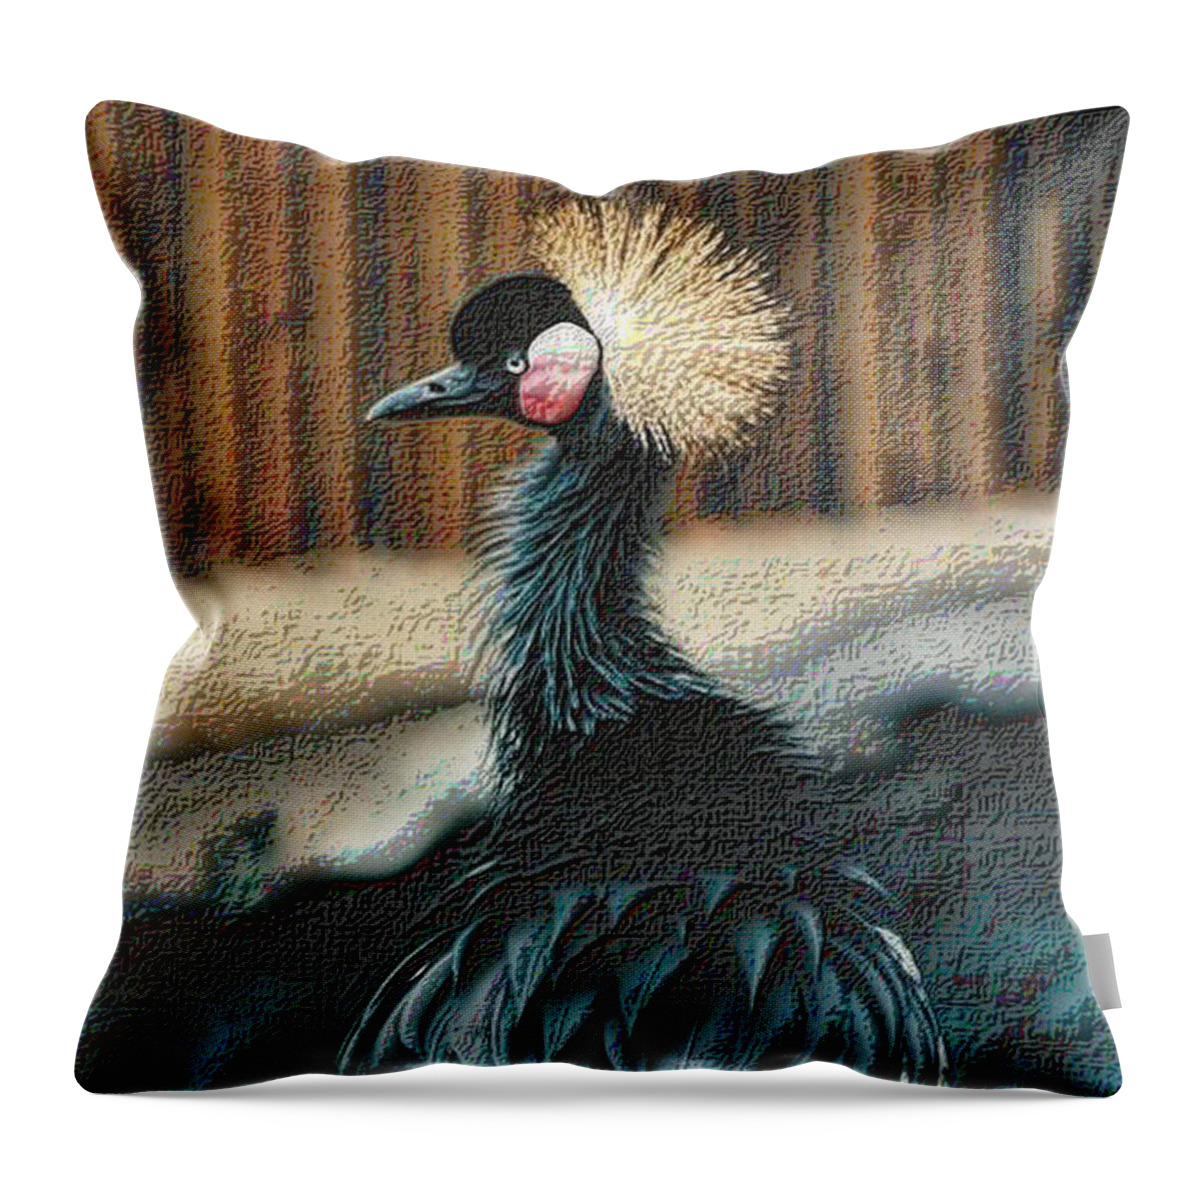 Bird Throw Pillow featuring the photograph Crowned Crested Crane by Nadalyn Larsen